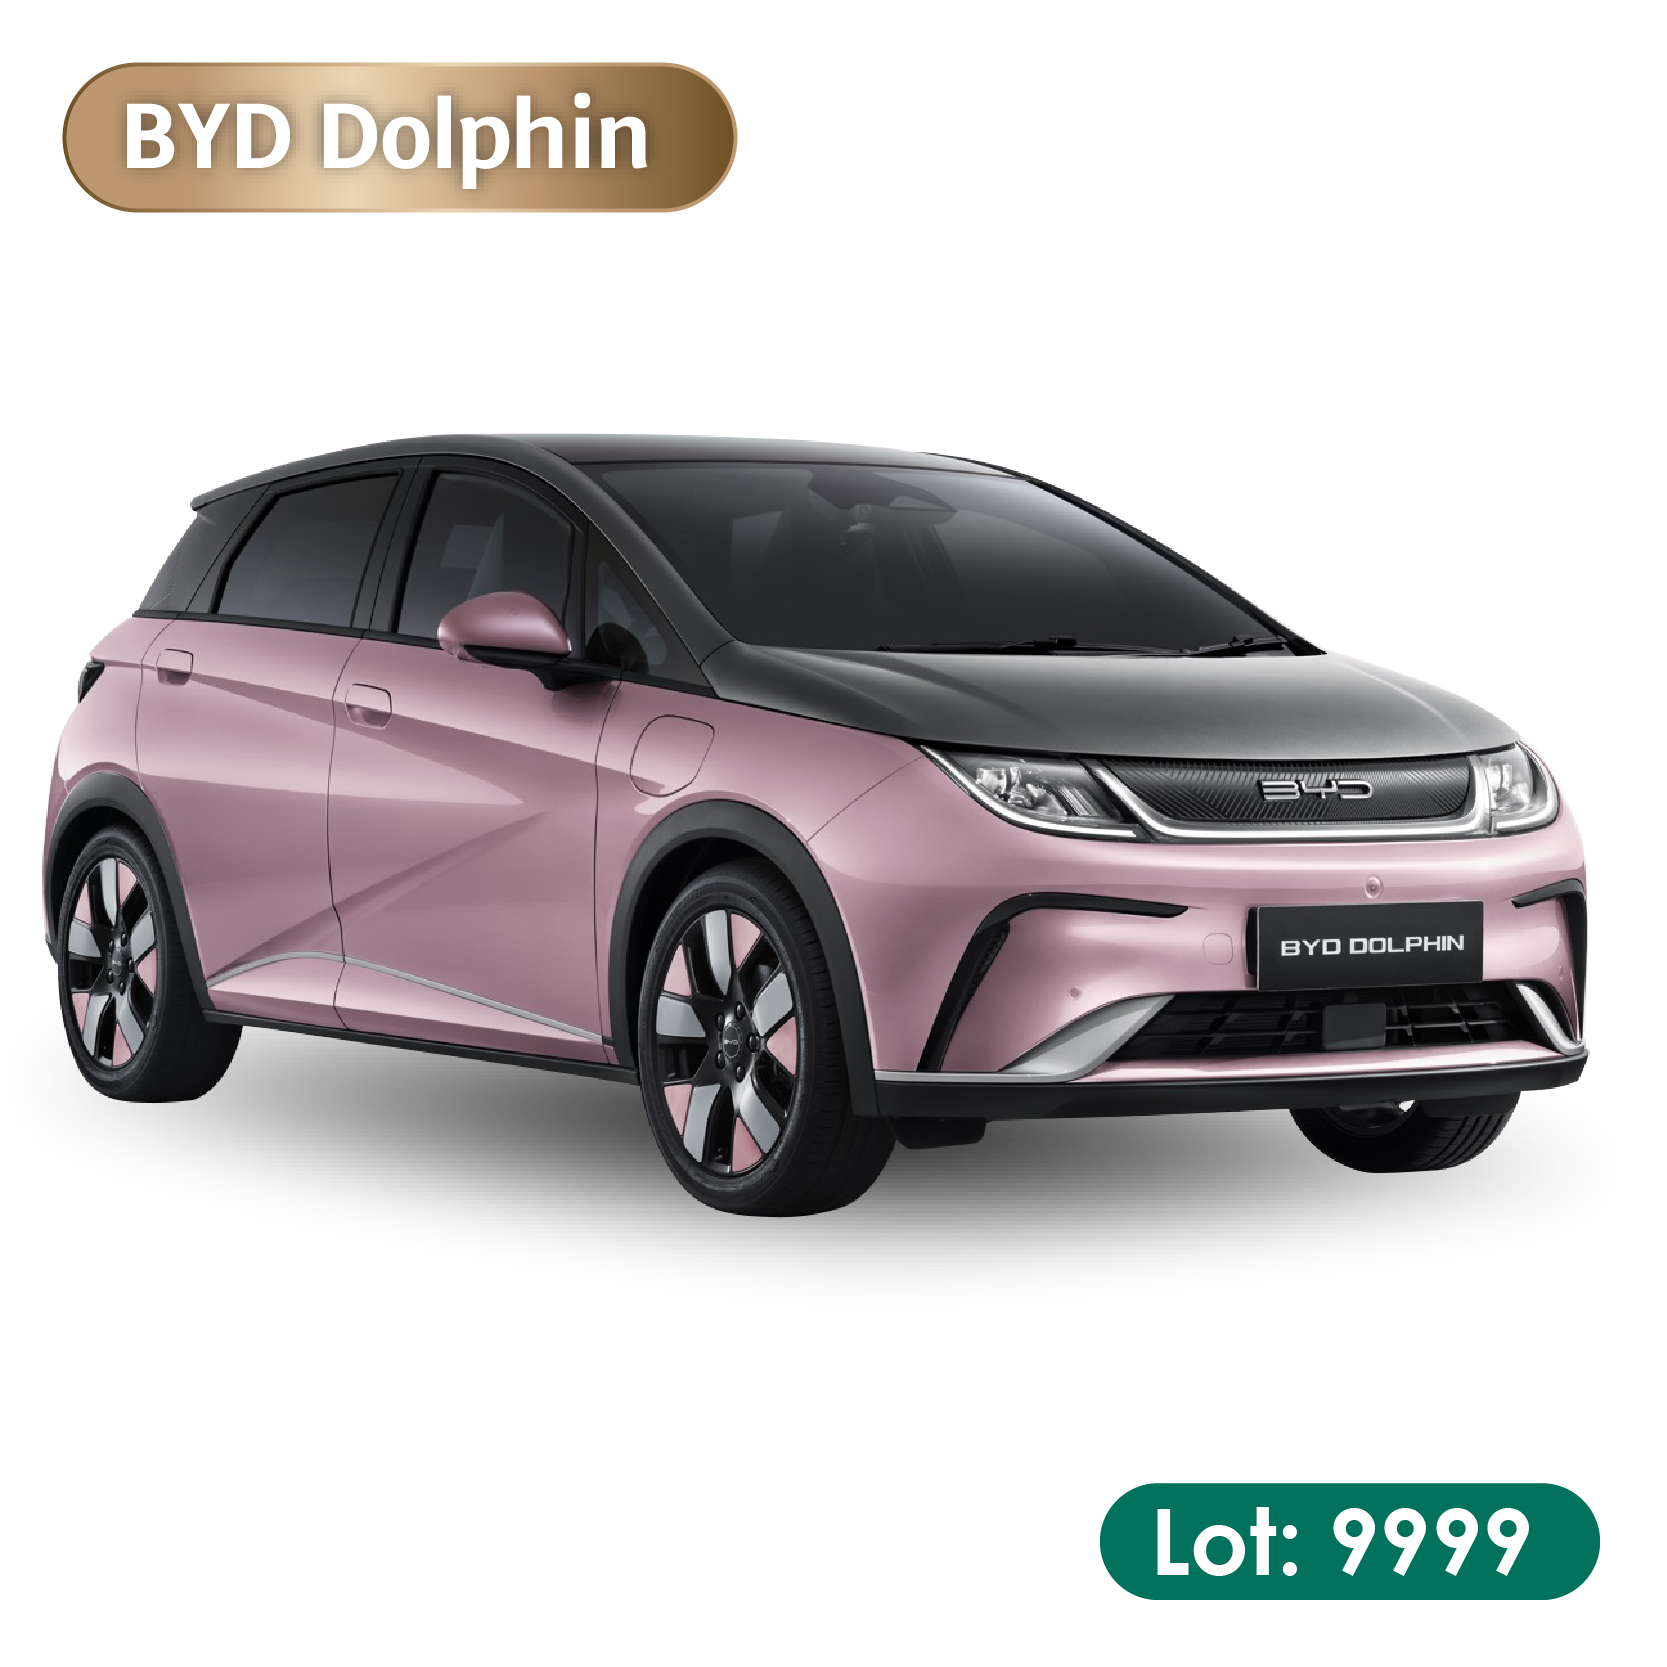 9. BYD Dolphin | Lot: 9999